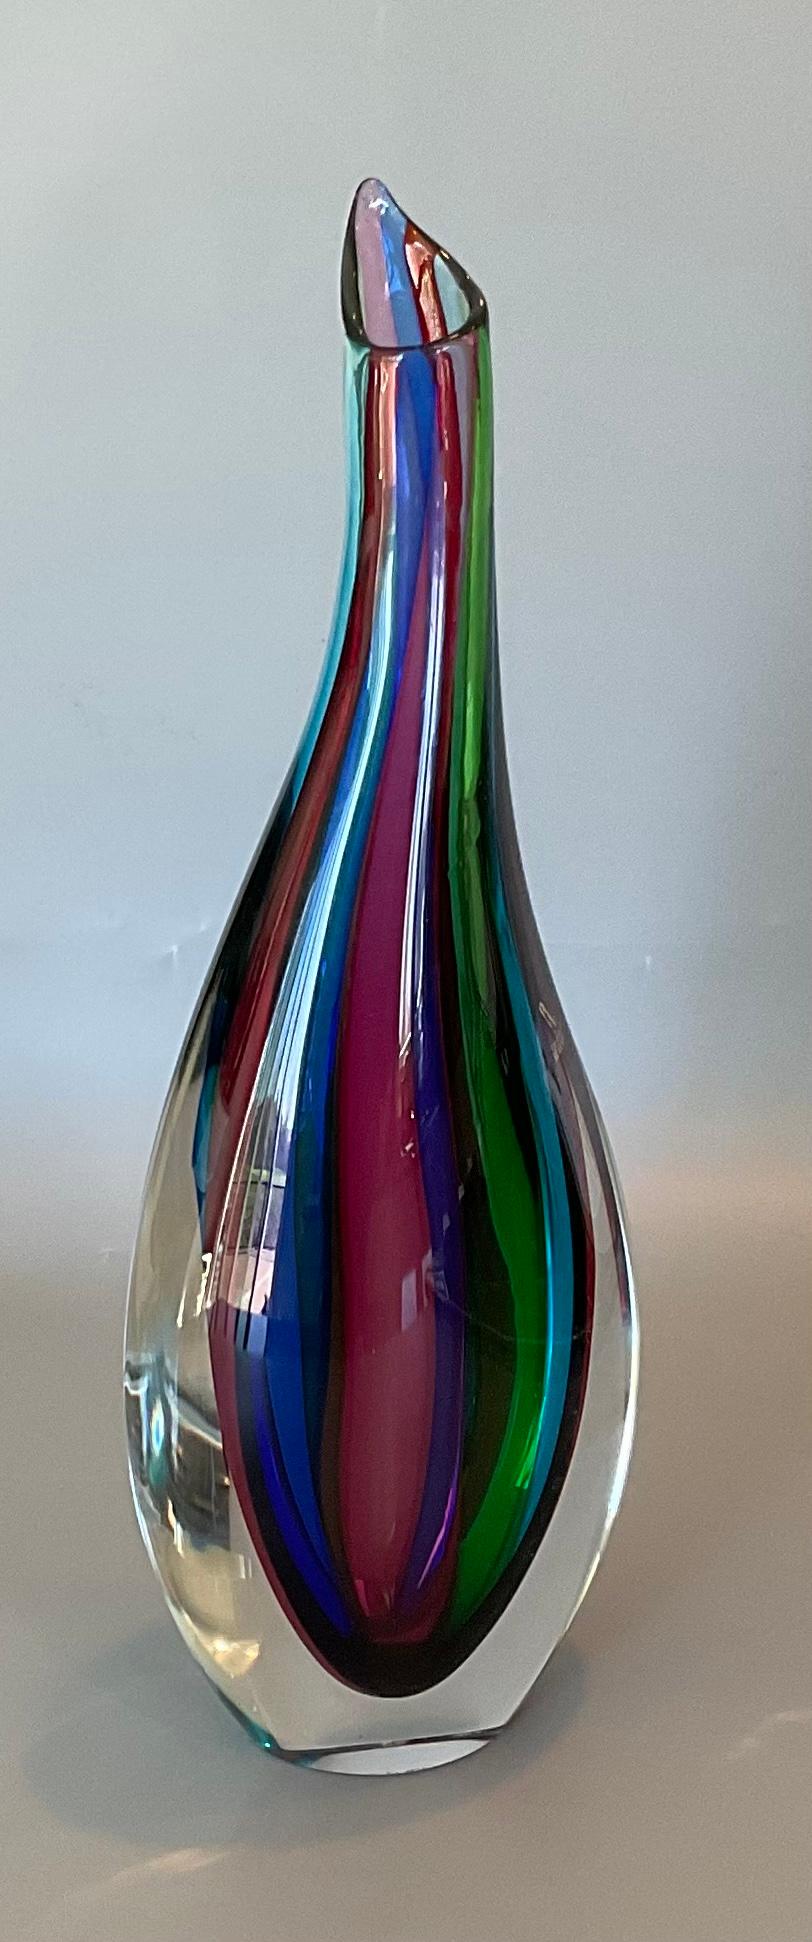 Late 20th Century Giuliani Mian Murano Art Glass Vase Striped Multi Color Signed by the Artist For Sale